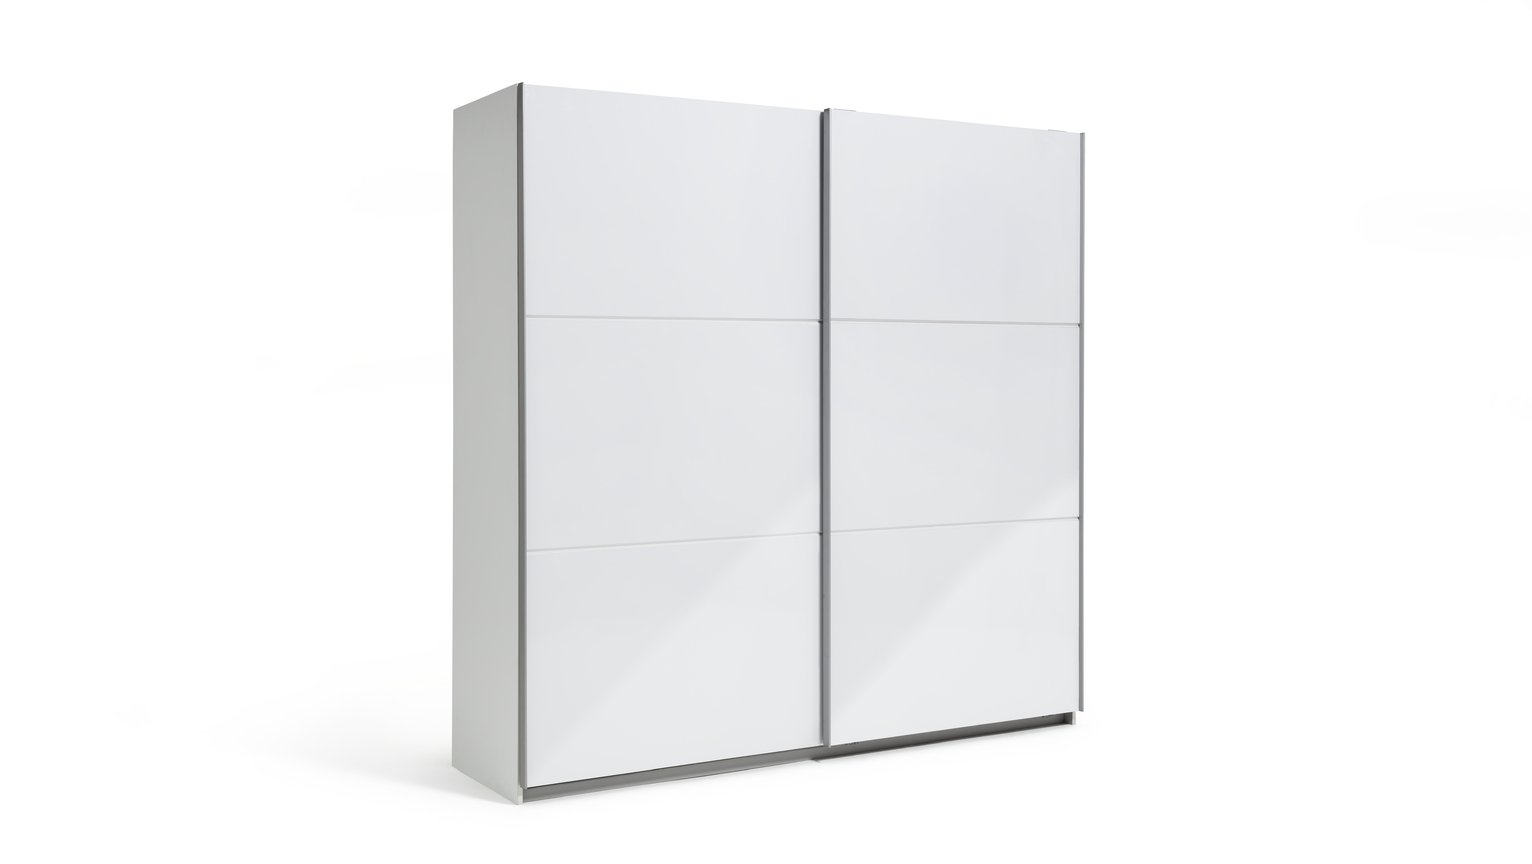 Argos Home Holsted White Gloss Extra Large Sliding Wardrobe Review